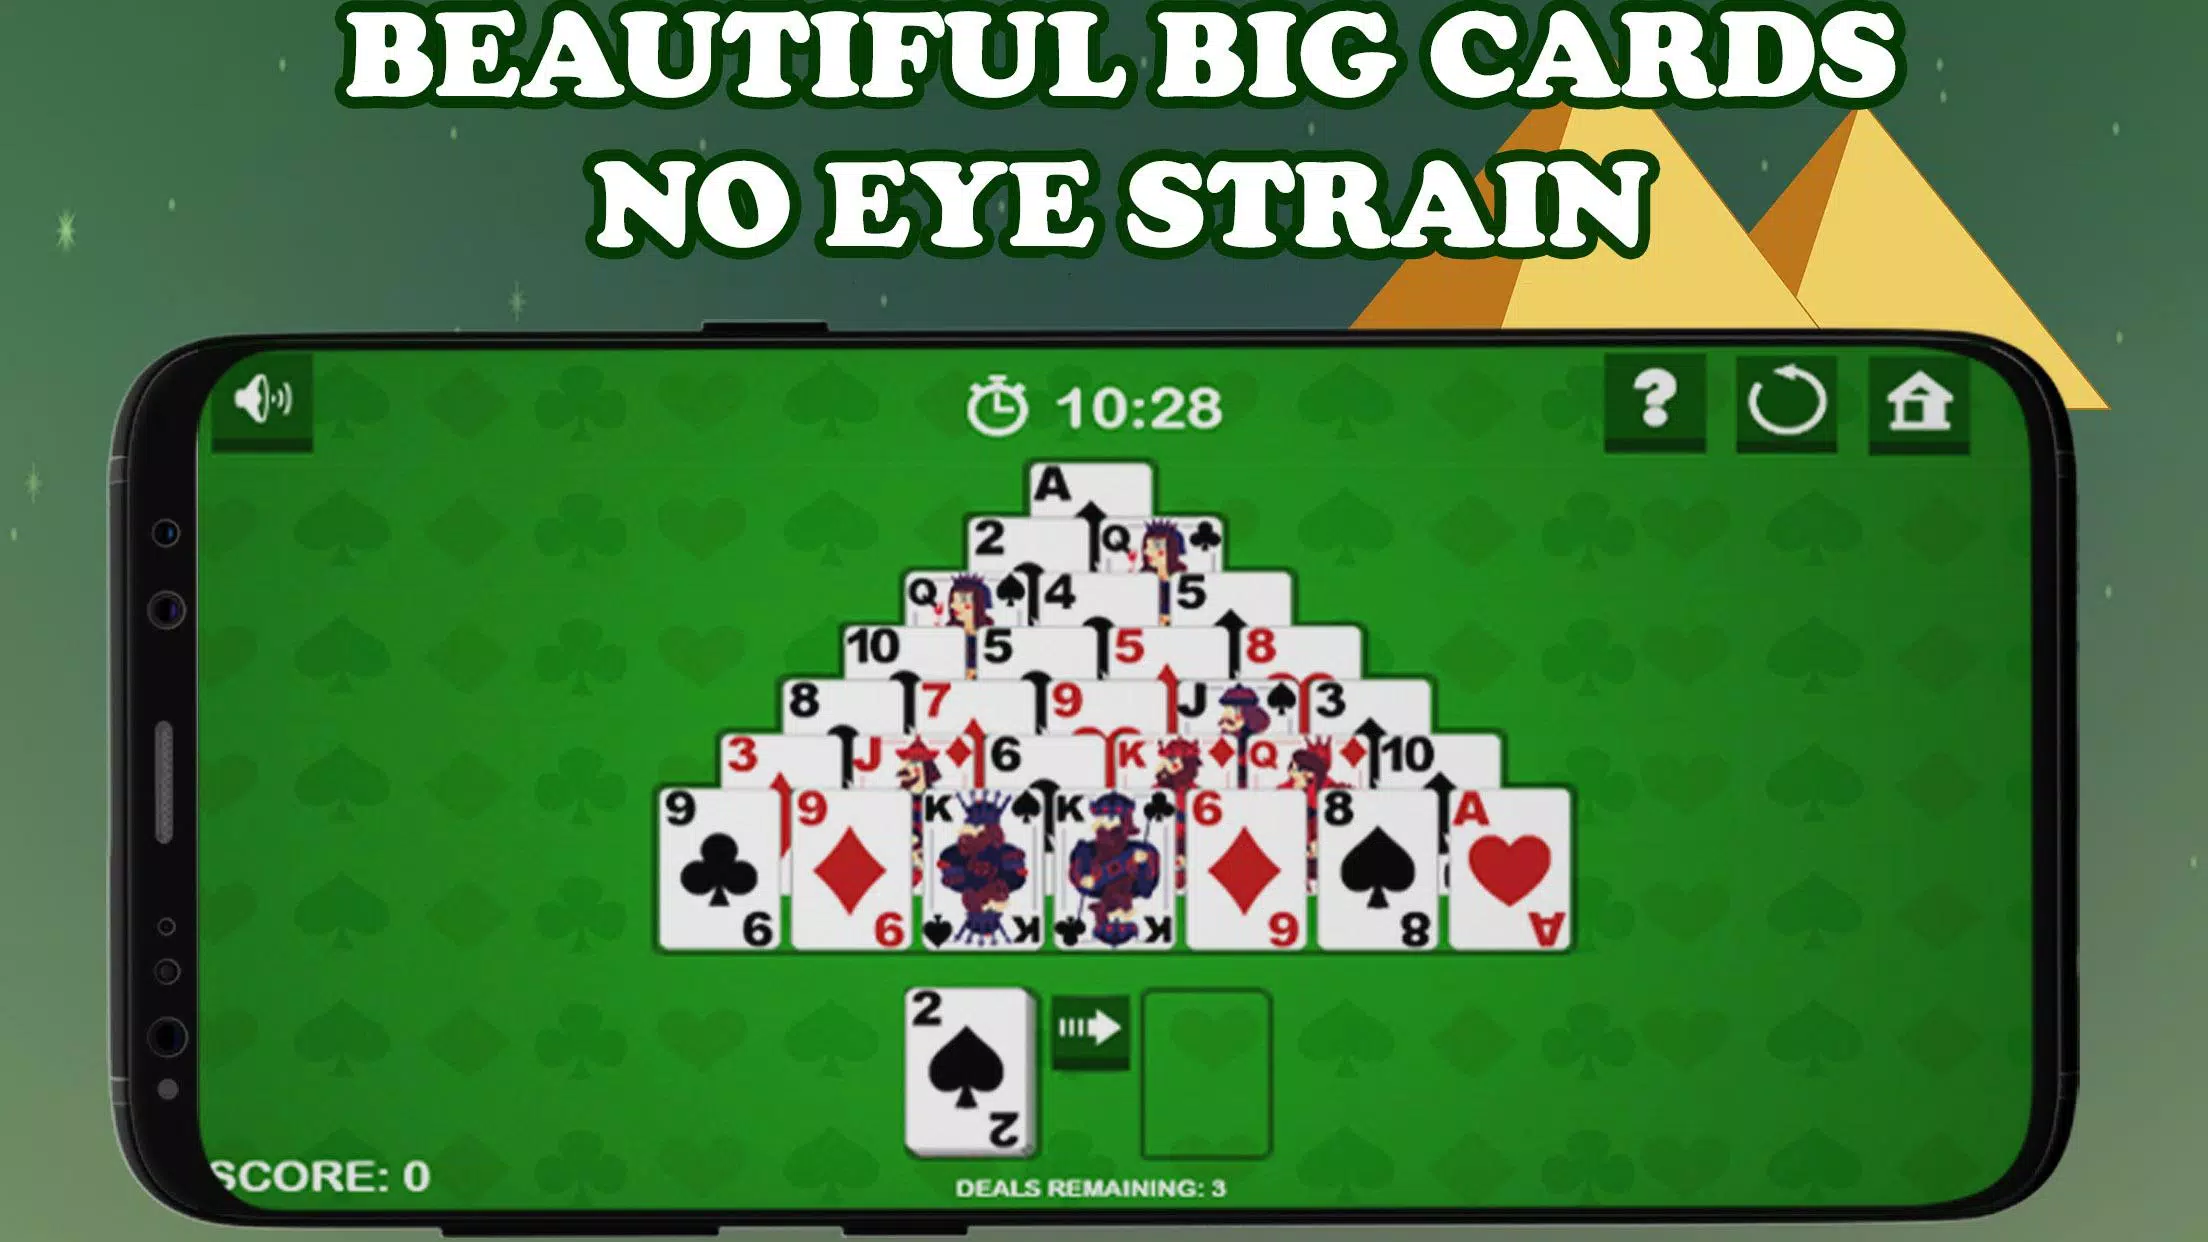 Pyramid Solitaire - Card Games para Android - Download